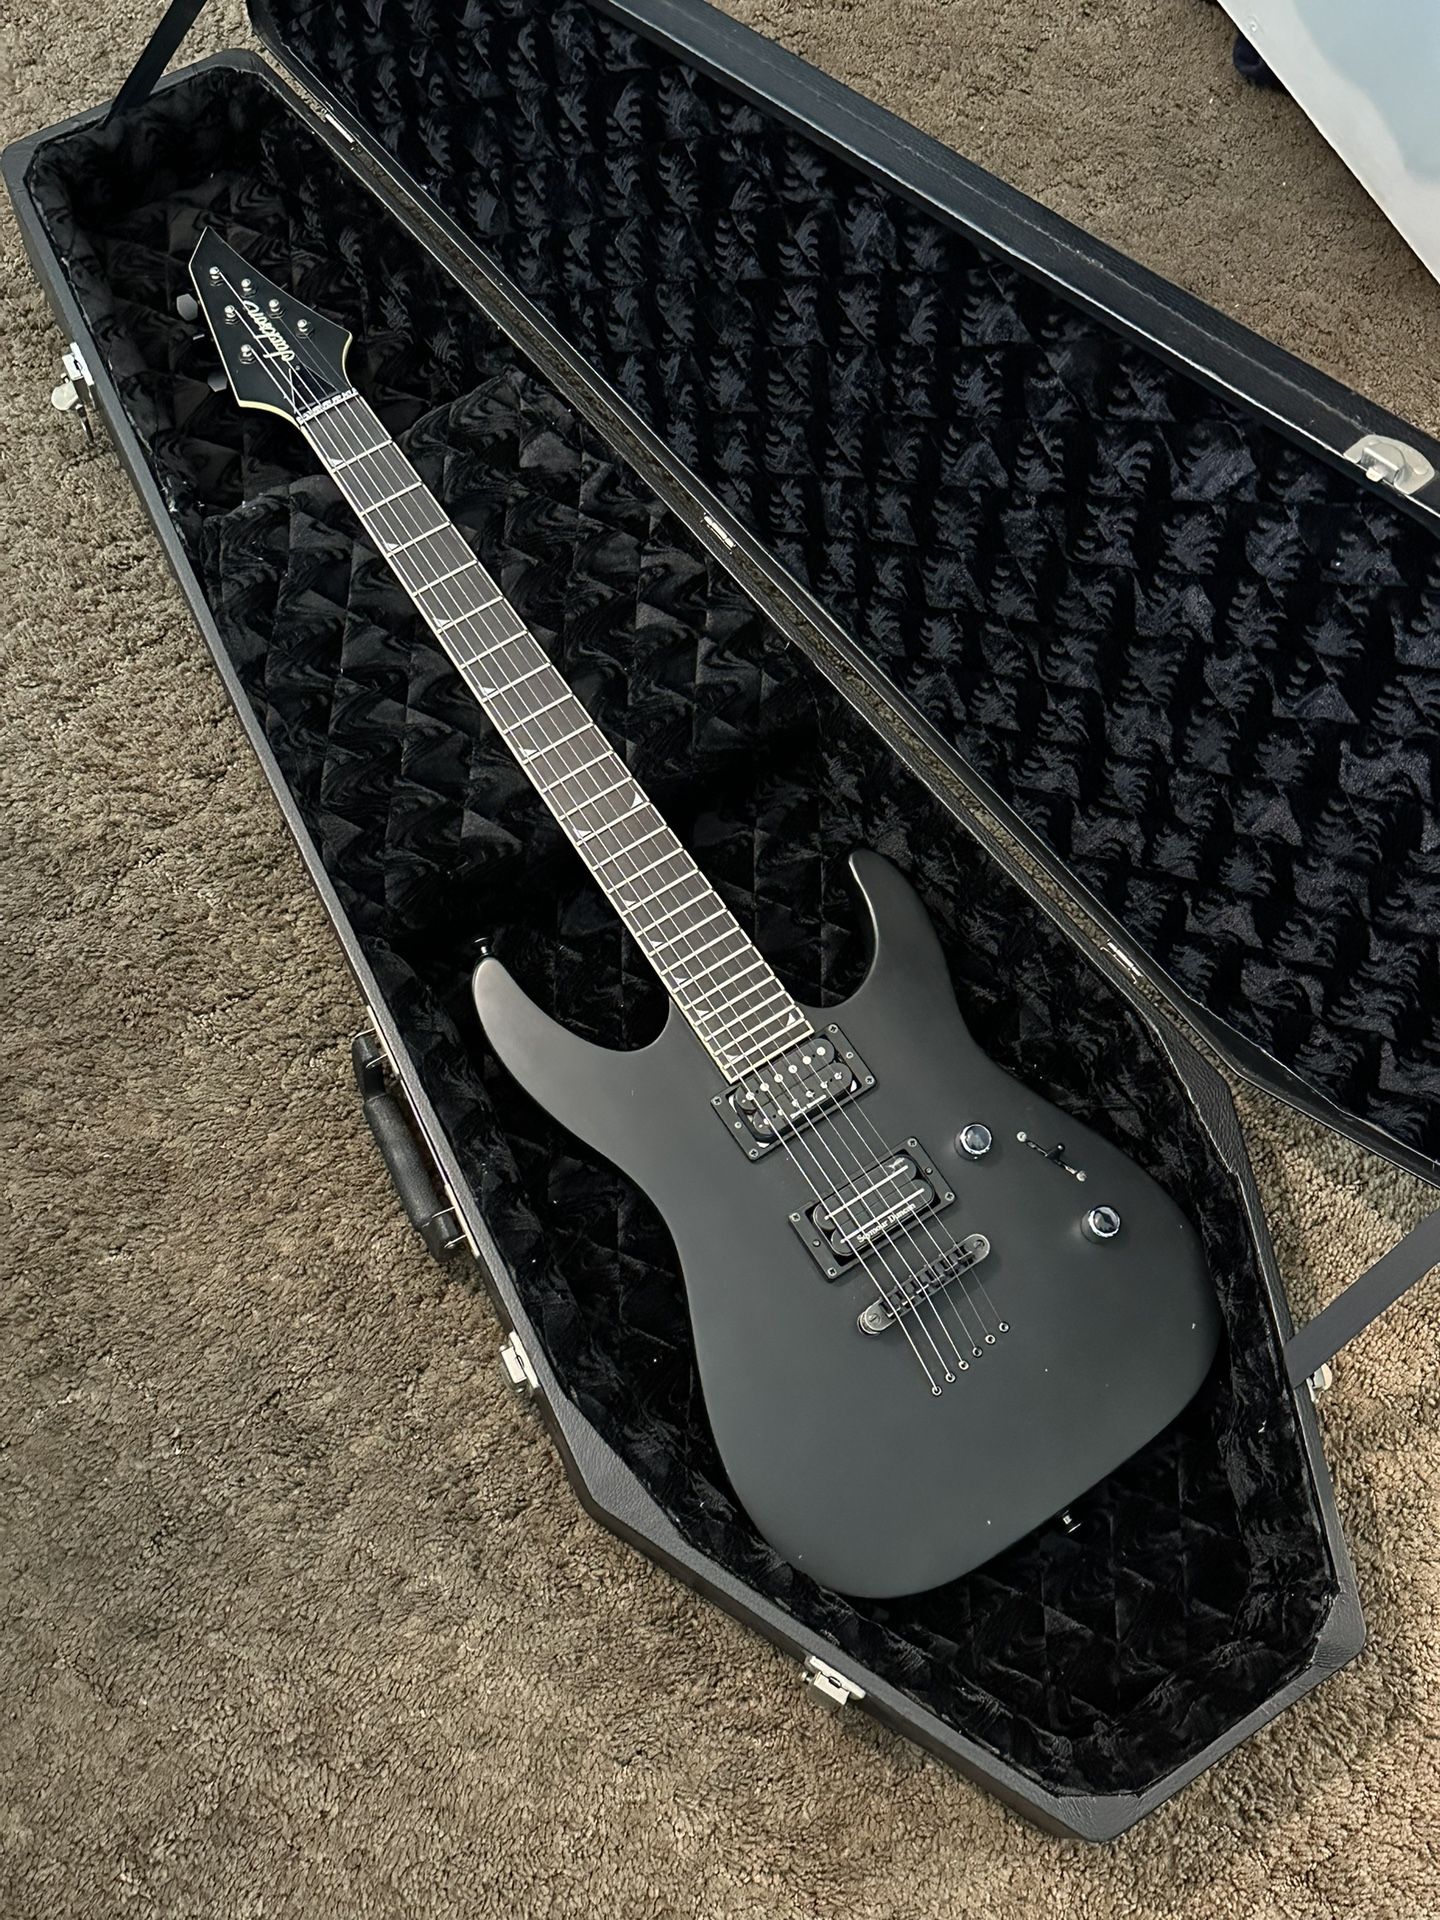 Satin Black 2002 Jackson SLSMG Soloist (with Duncan upgrades and Coffin Case)